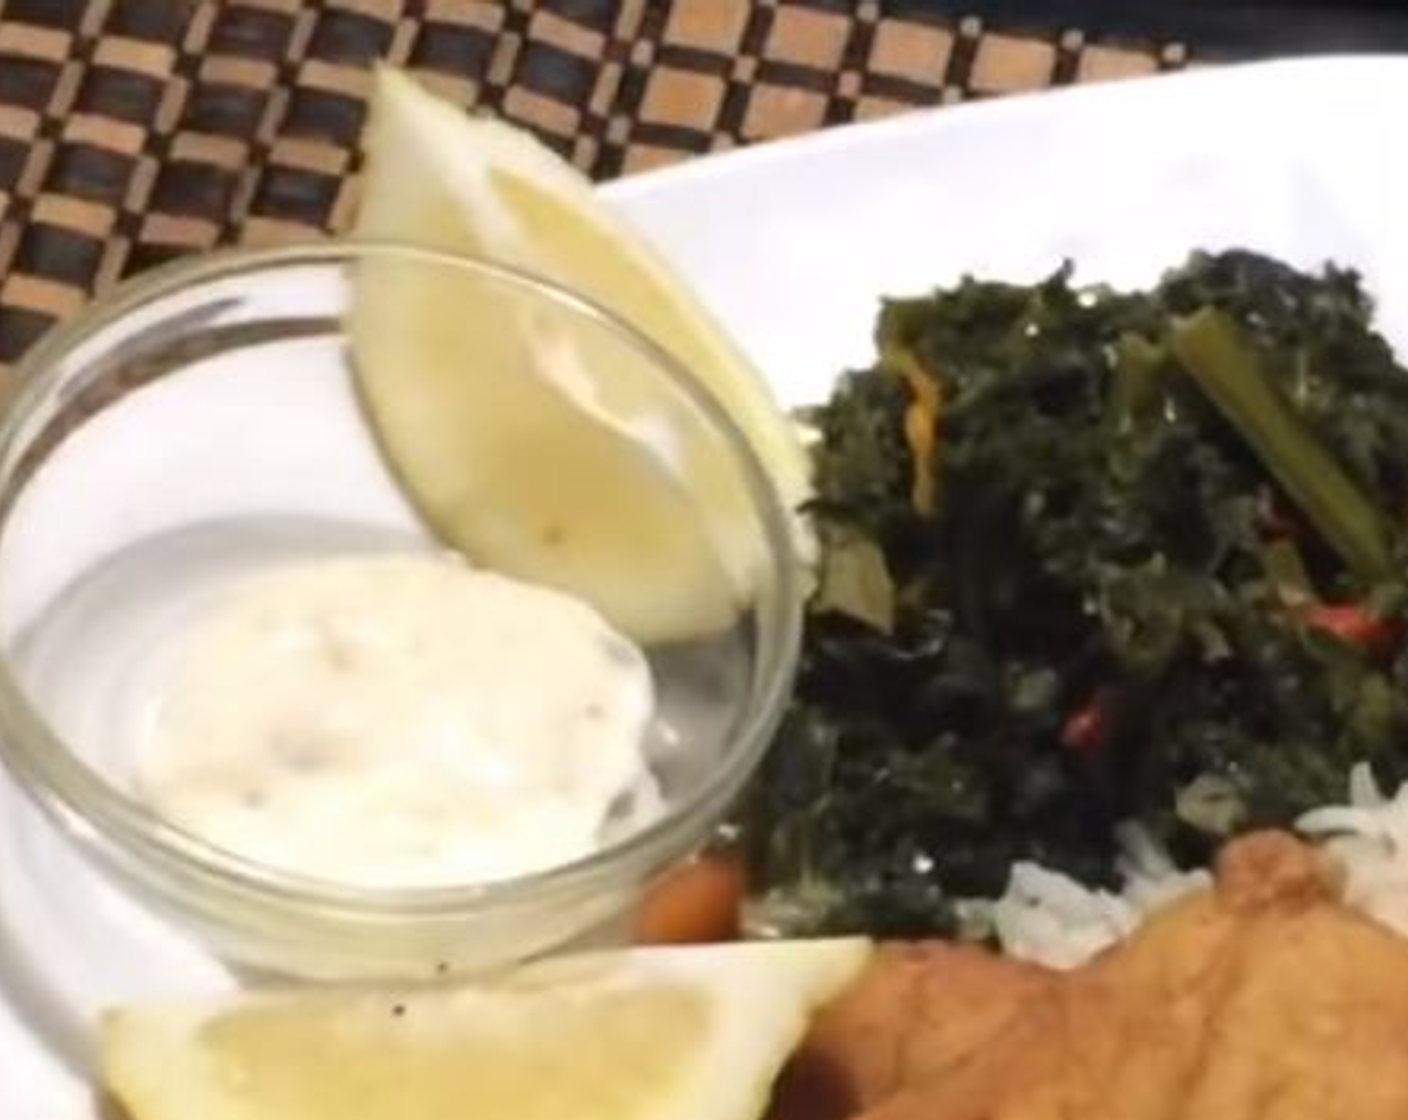 step 11 Place butter rice, kale, and the flounder on a plate and enjoy!